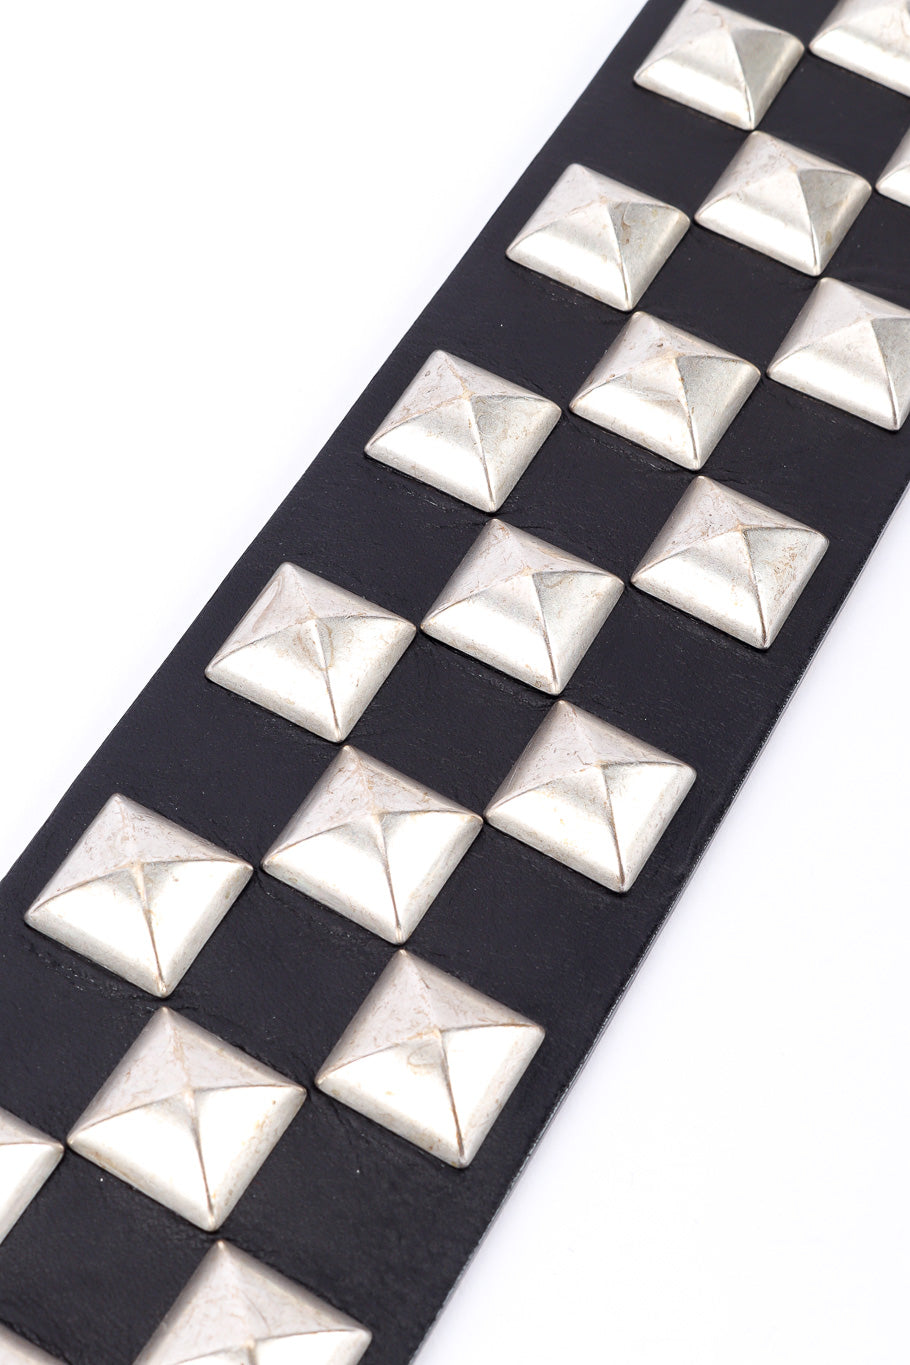 Studded leather statement belt by Streets Ahead studs close  @recessla